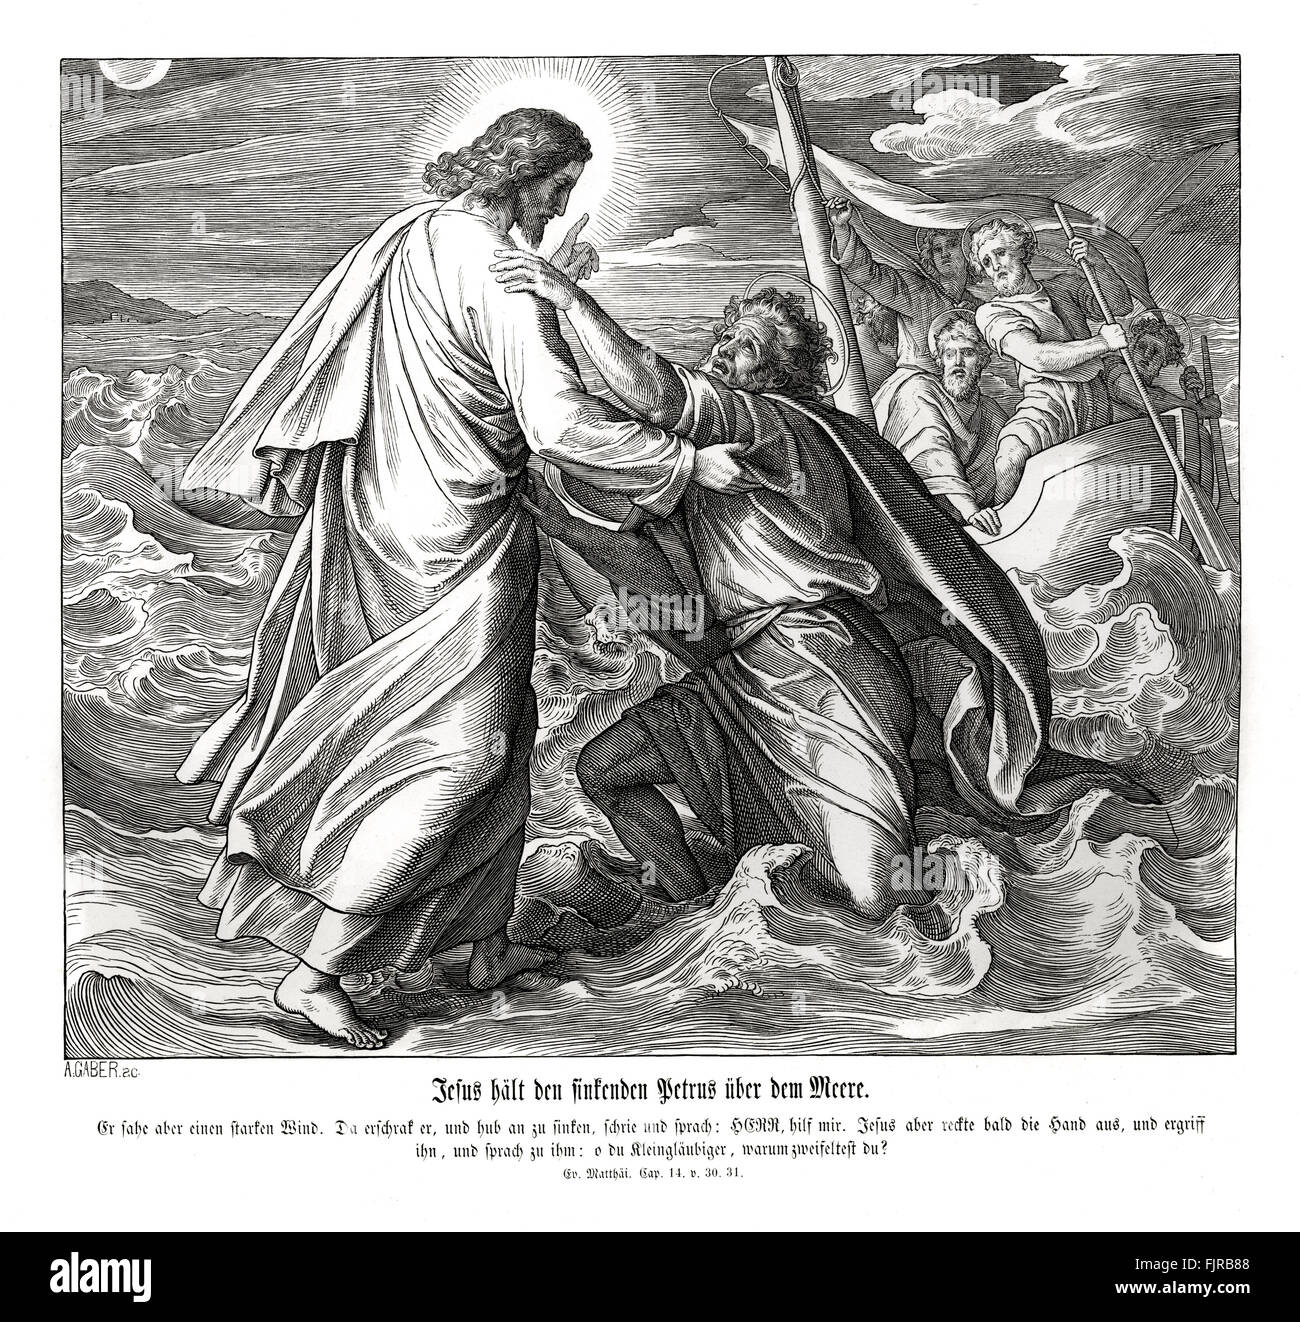 Jesus and Peter walk on water, Gospel of Matthew chapter XIV verses 30 - 31 'But when he saw the wind boisterous, he was afraid; and beginning to sink, he cried, saying, Lord, save me. And immediately Jesus stretched forth his hand, and caught him, and said unto him, O thou of little faith, wherefore didst thou doubt?' 1852-60 illustration by Julius Schnorr von Carolsfeld Stock Photo